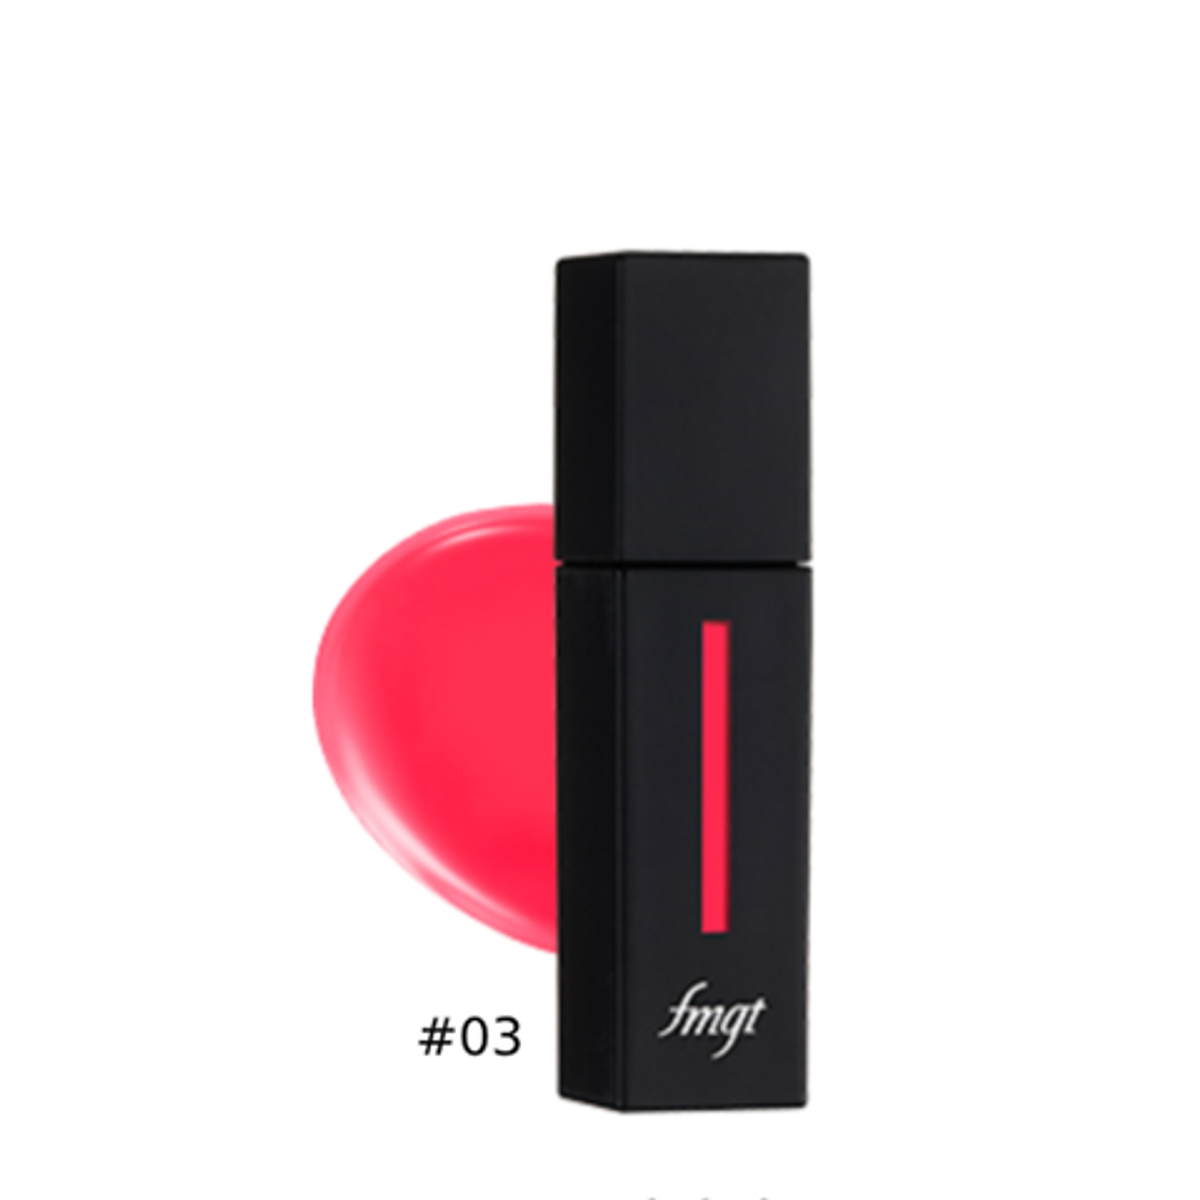 gift-fmgt-son-nuoc-li-ink-tattoo-lip-tint-5g-01-vintage-pink-03-tropical-pink-1